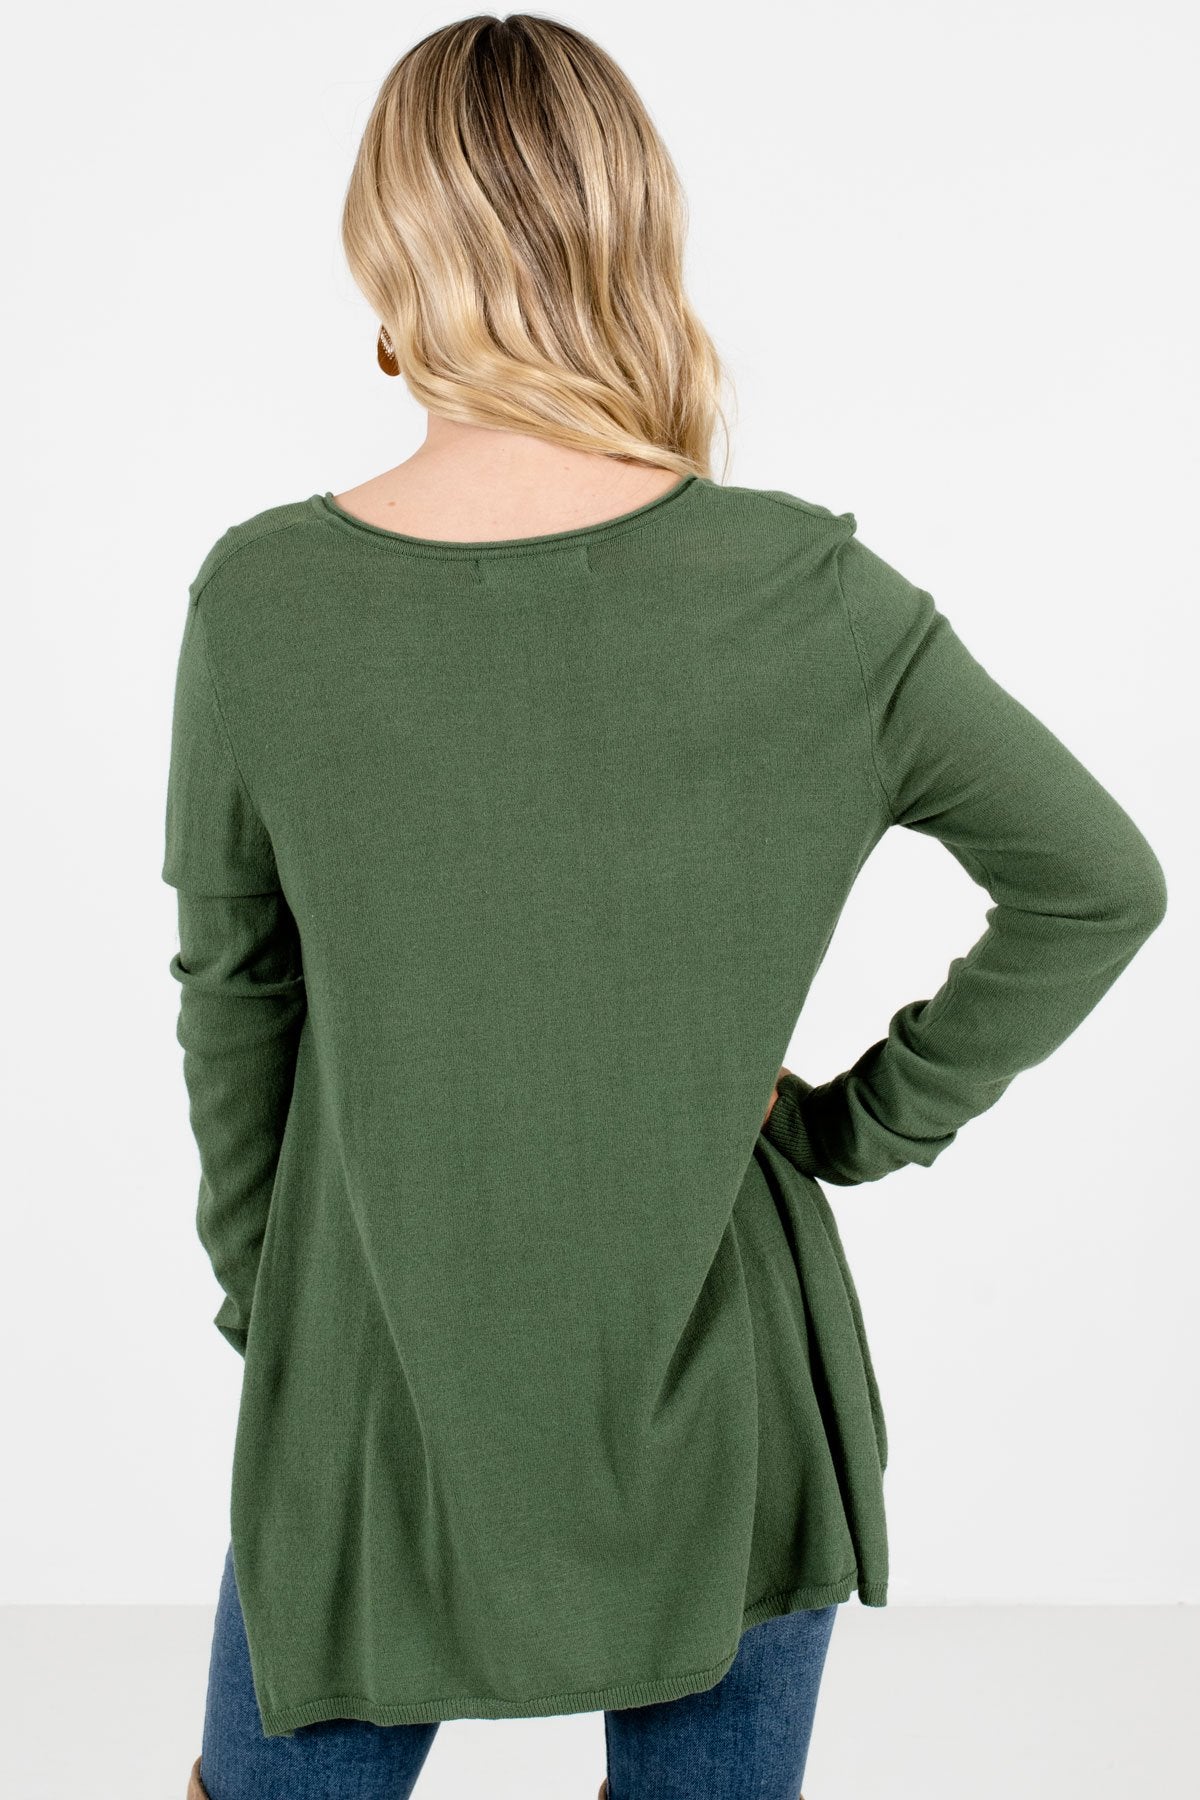 Women’s Olive Green High-Low Hem Boutique Sweater